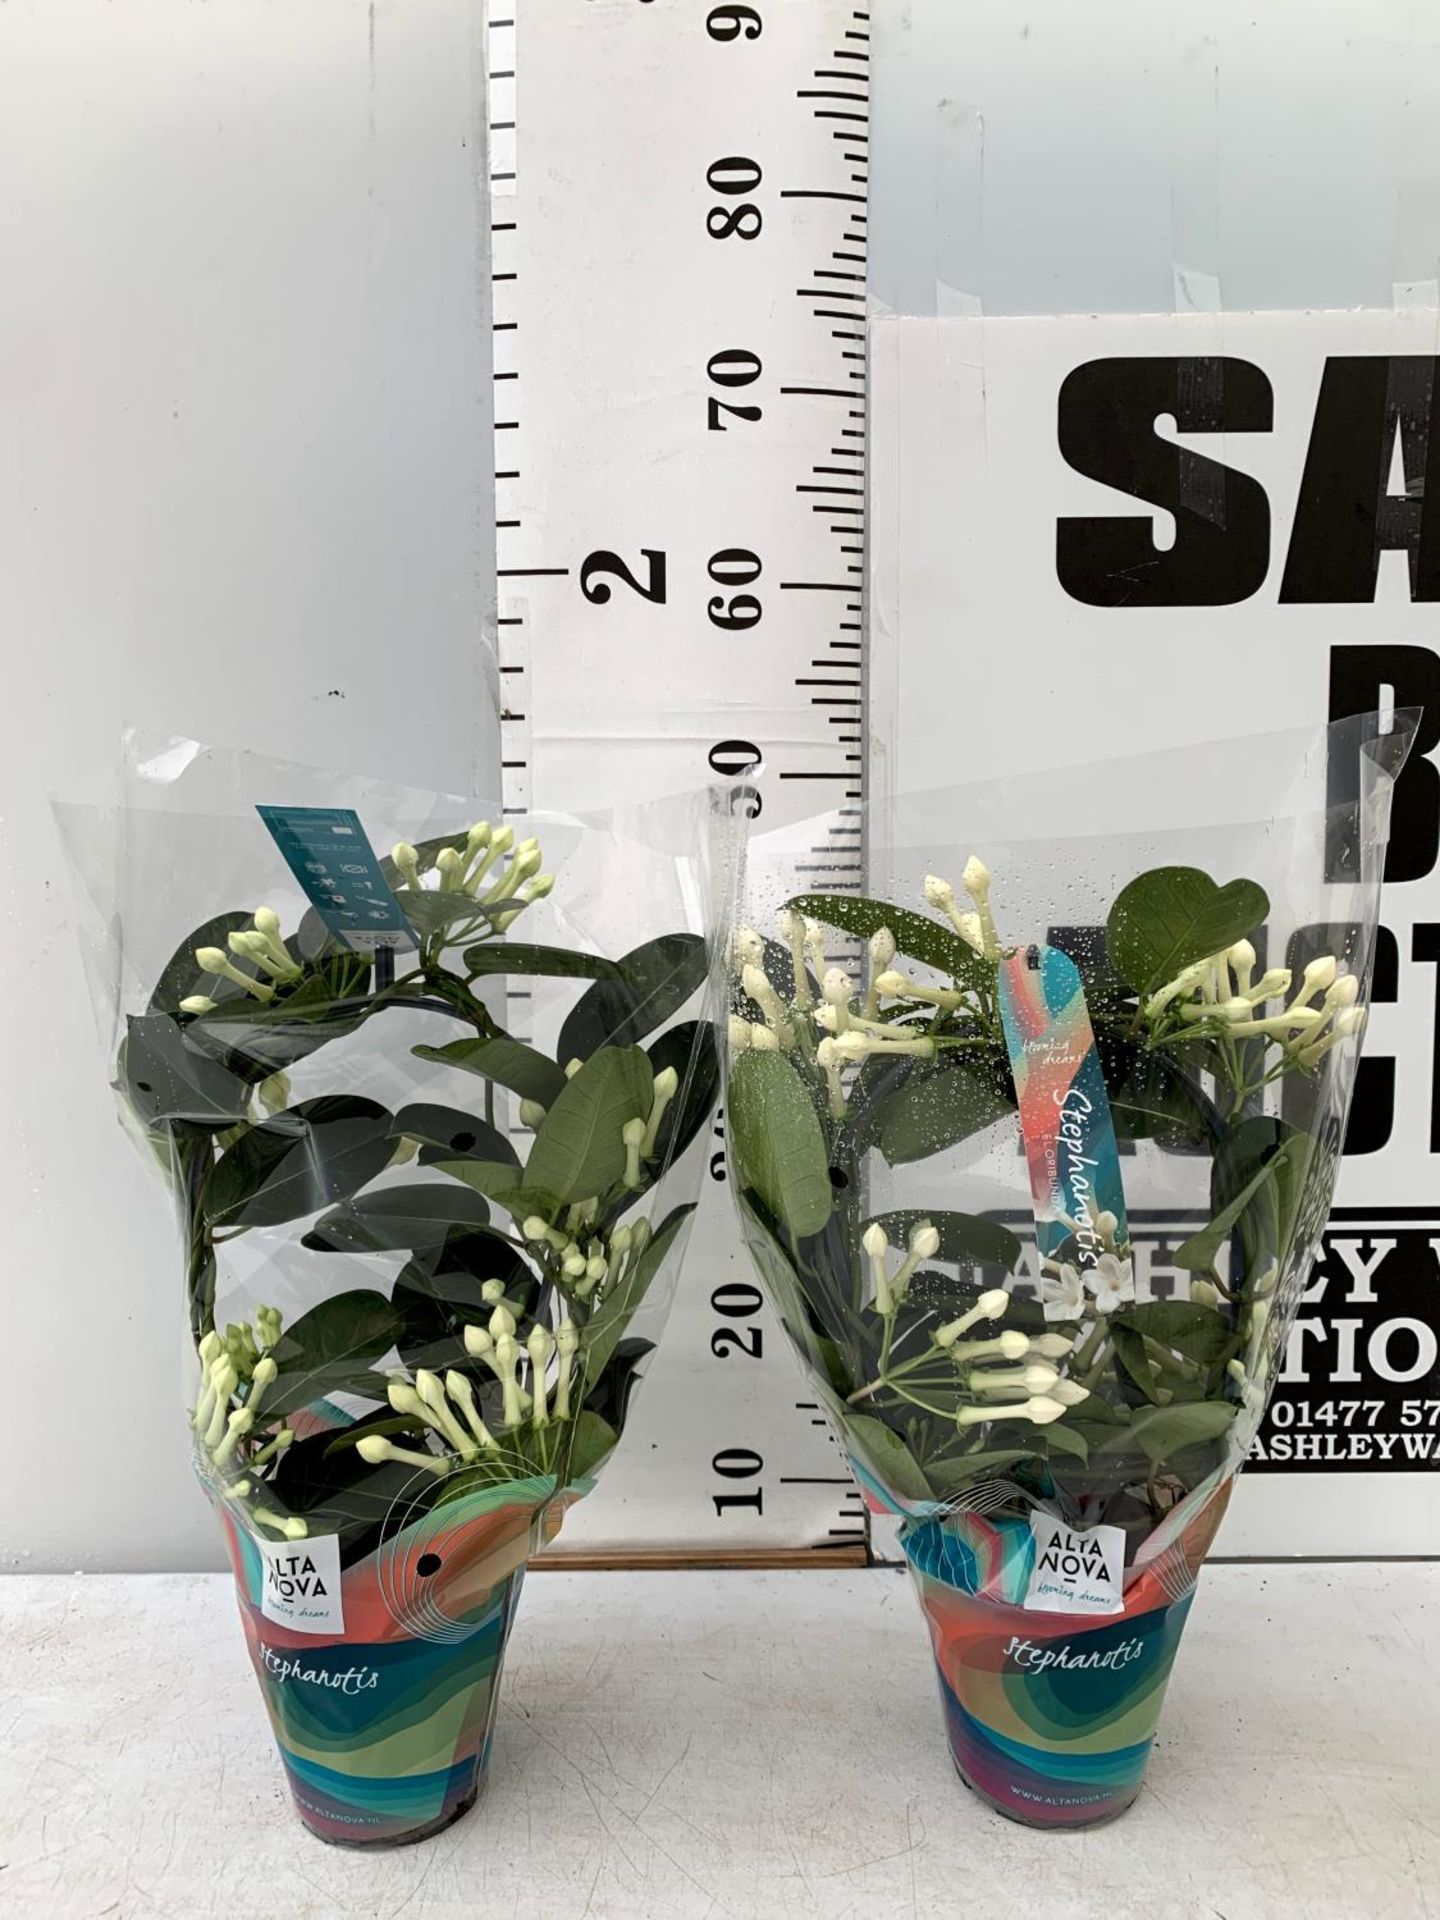 TWO STEPHANOTIS FLORIUNDA BOW GROWN ON A HOOP IN A 1 LTR POT PLUS VAT TO BE SOLD FOR THE TWO